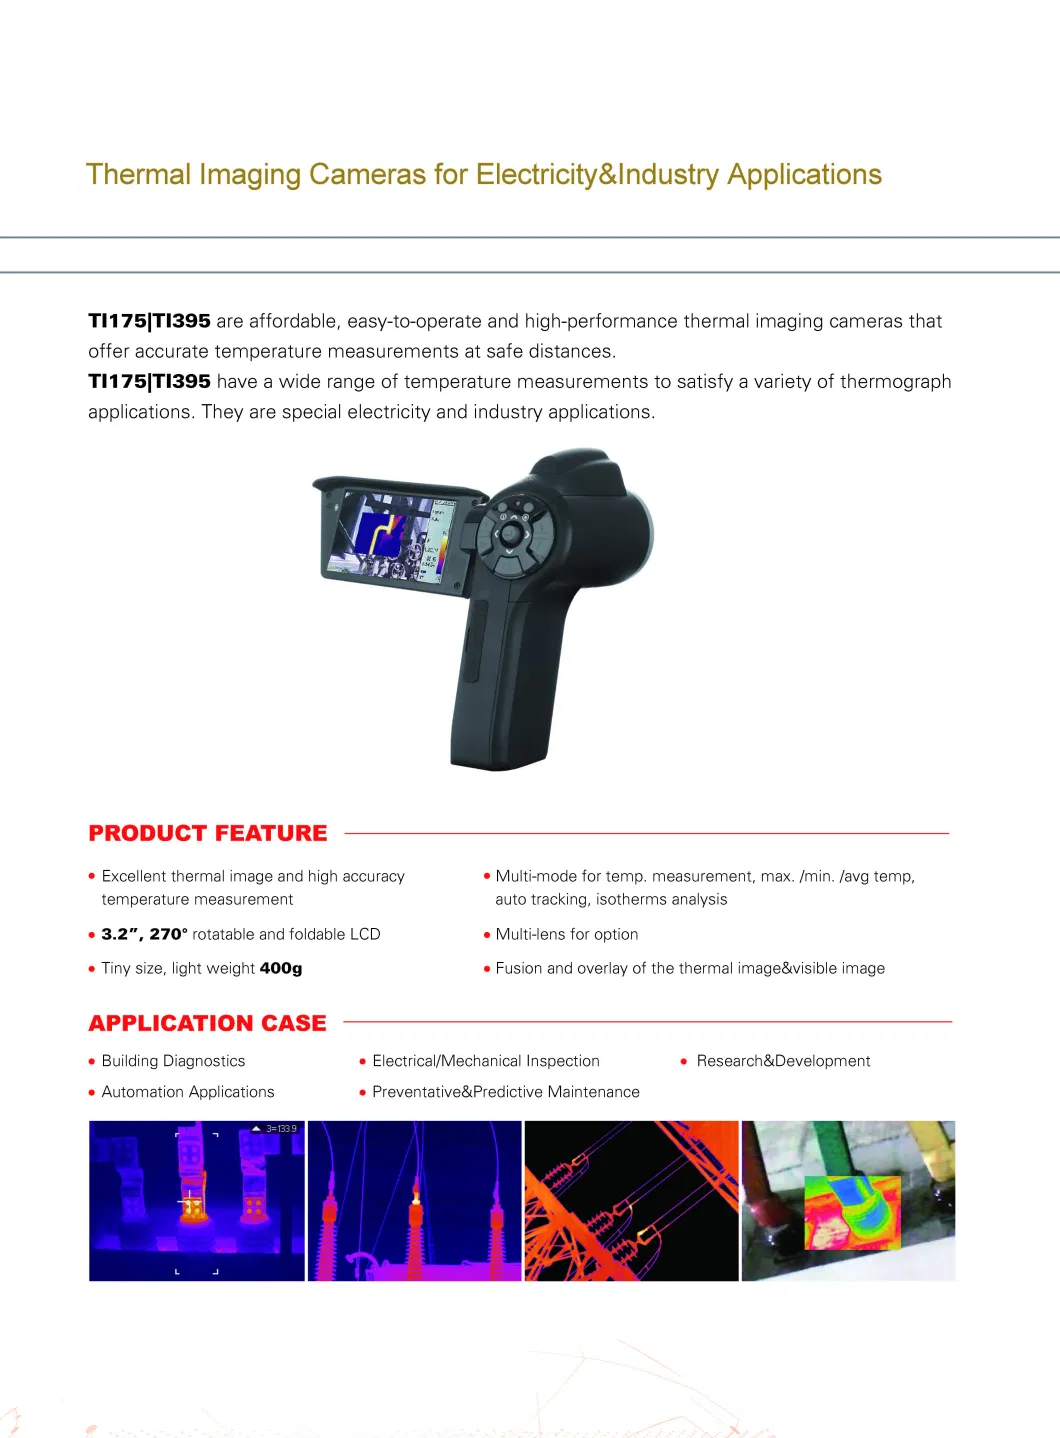 Thermal Imager for Industrial, Thermal Imaging Camera for Electrical & Industrial IR Camera